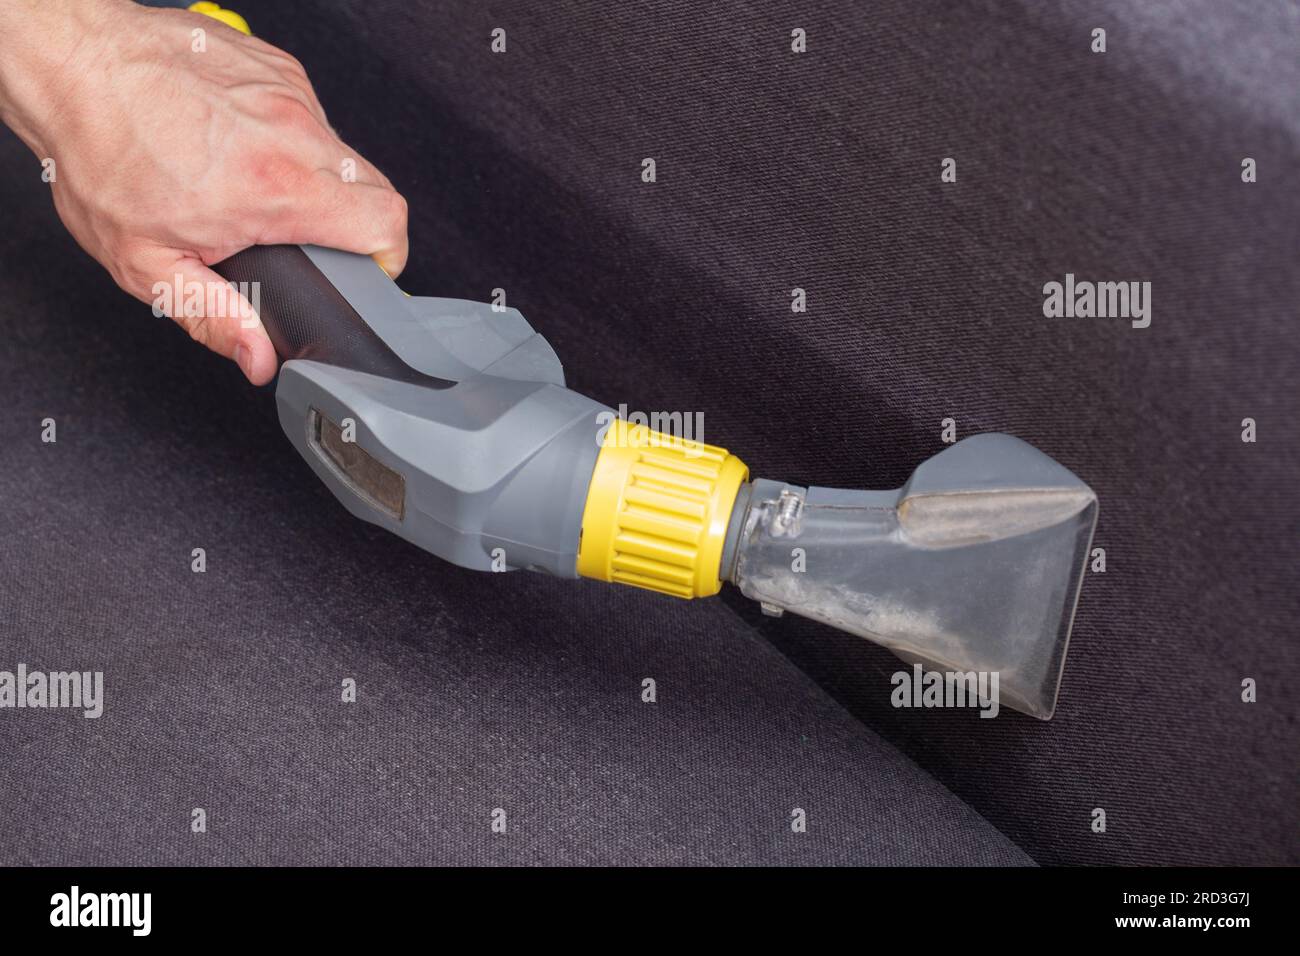 Dry cleaning of the black upholstery on the sofa with a special washing vacuum cleaner. Stock Photo